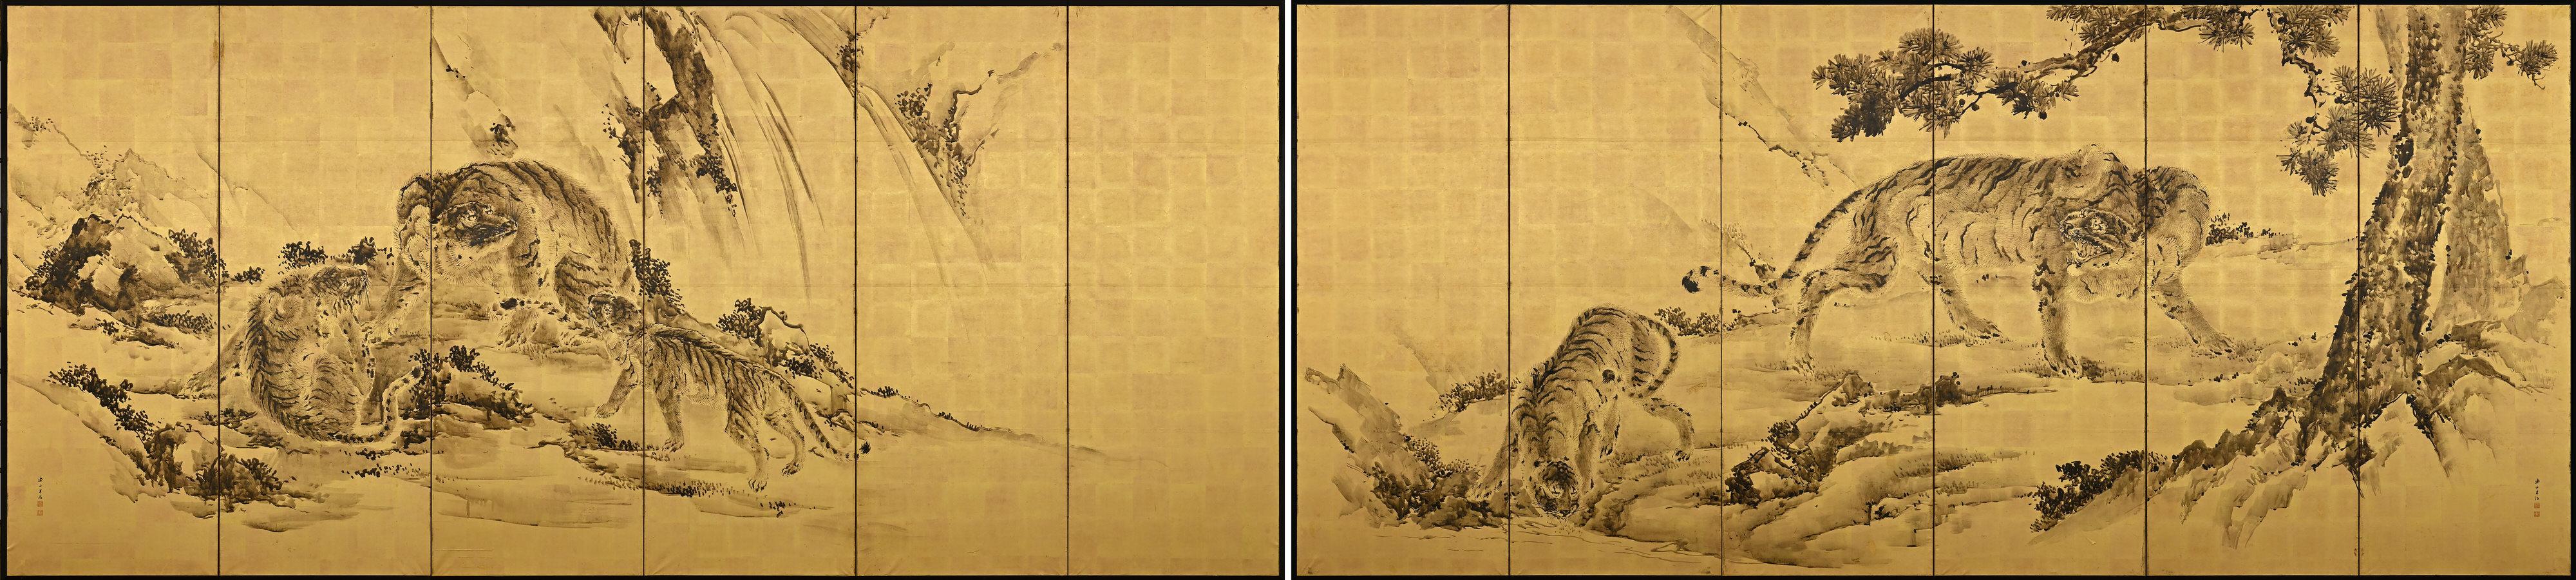 Kishi Renzan (1804-1859)

Tigers

Pair of six-panel Japanese screens.

Ink and gold-leaf on paper.

In this monochromatic pair of six-fold Japanese screens painted on gold-leaf, Kishi Renzan has created a breathtaking composition of a family